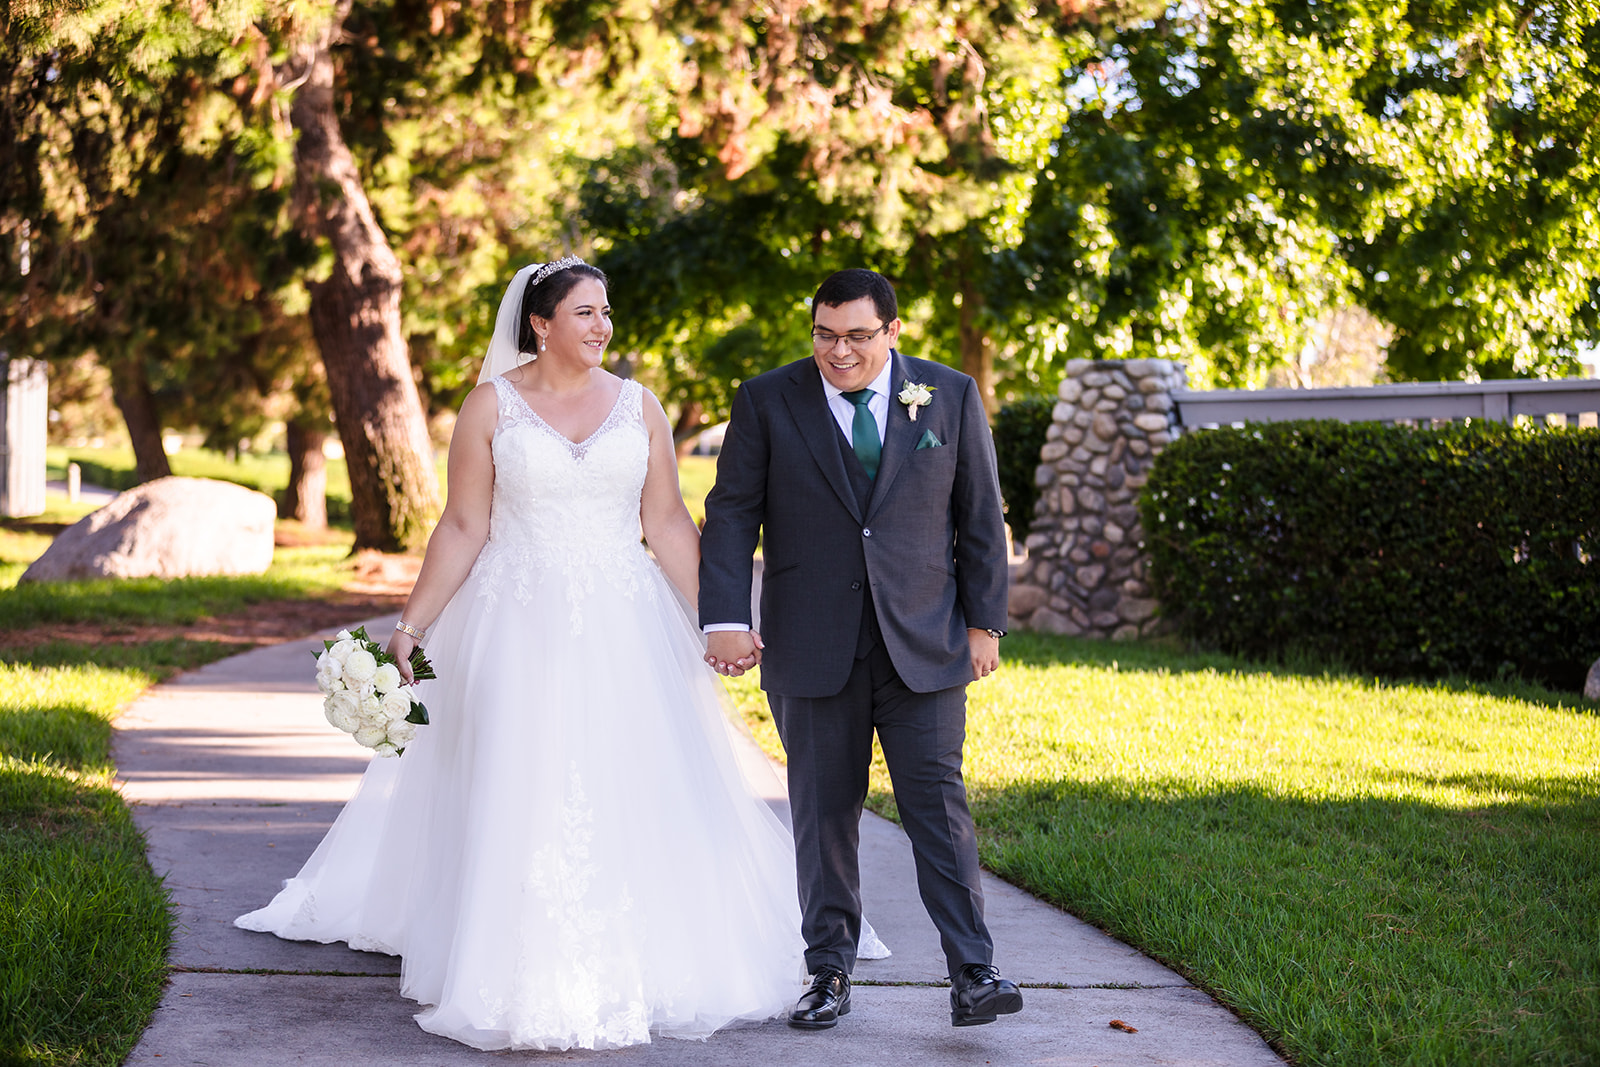 Bride and groom walking portrait in a park, Irvine, CA